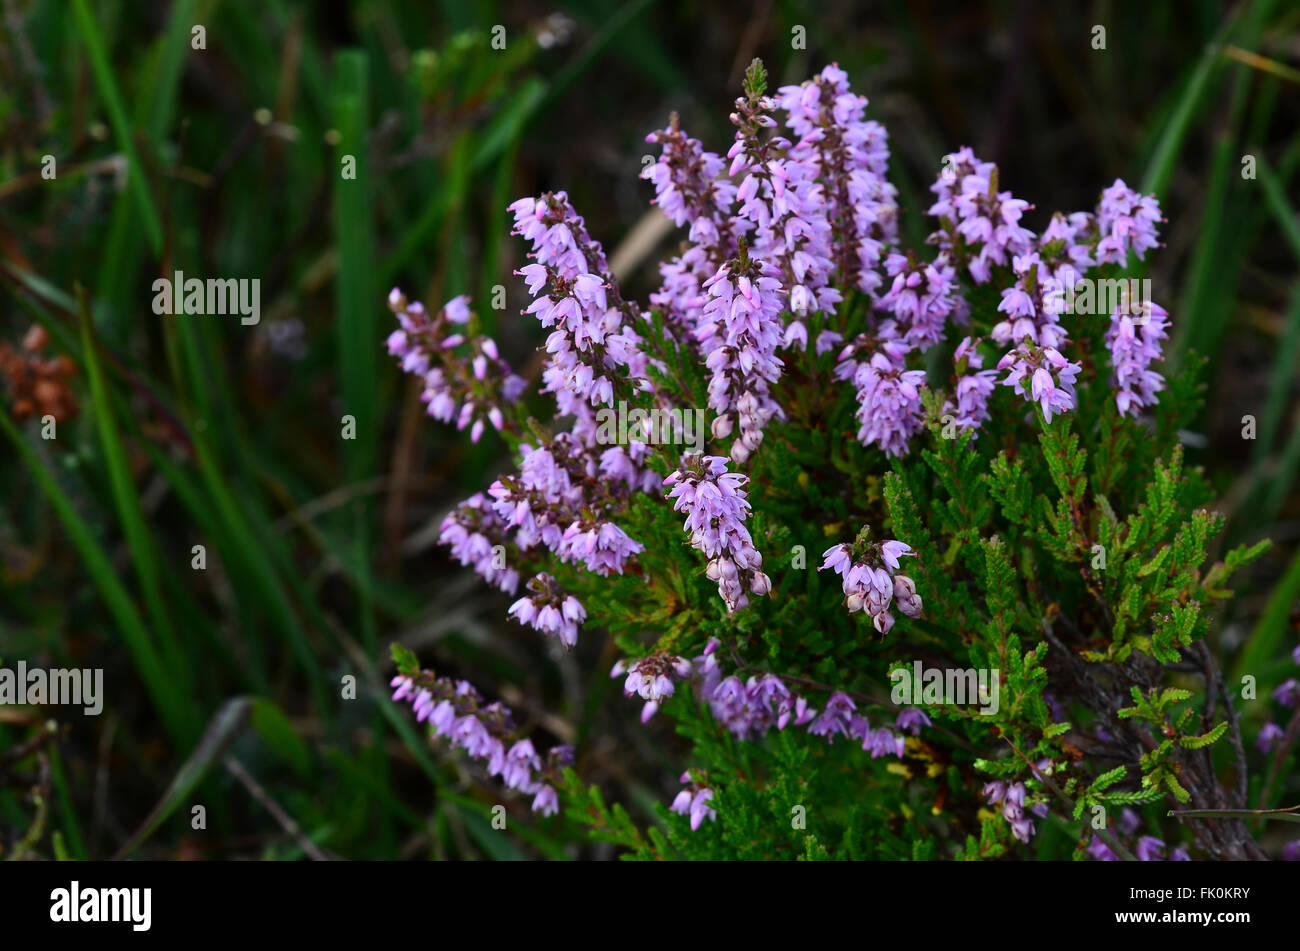 Ling or common heather Stock Photo